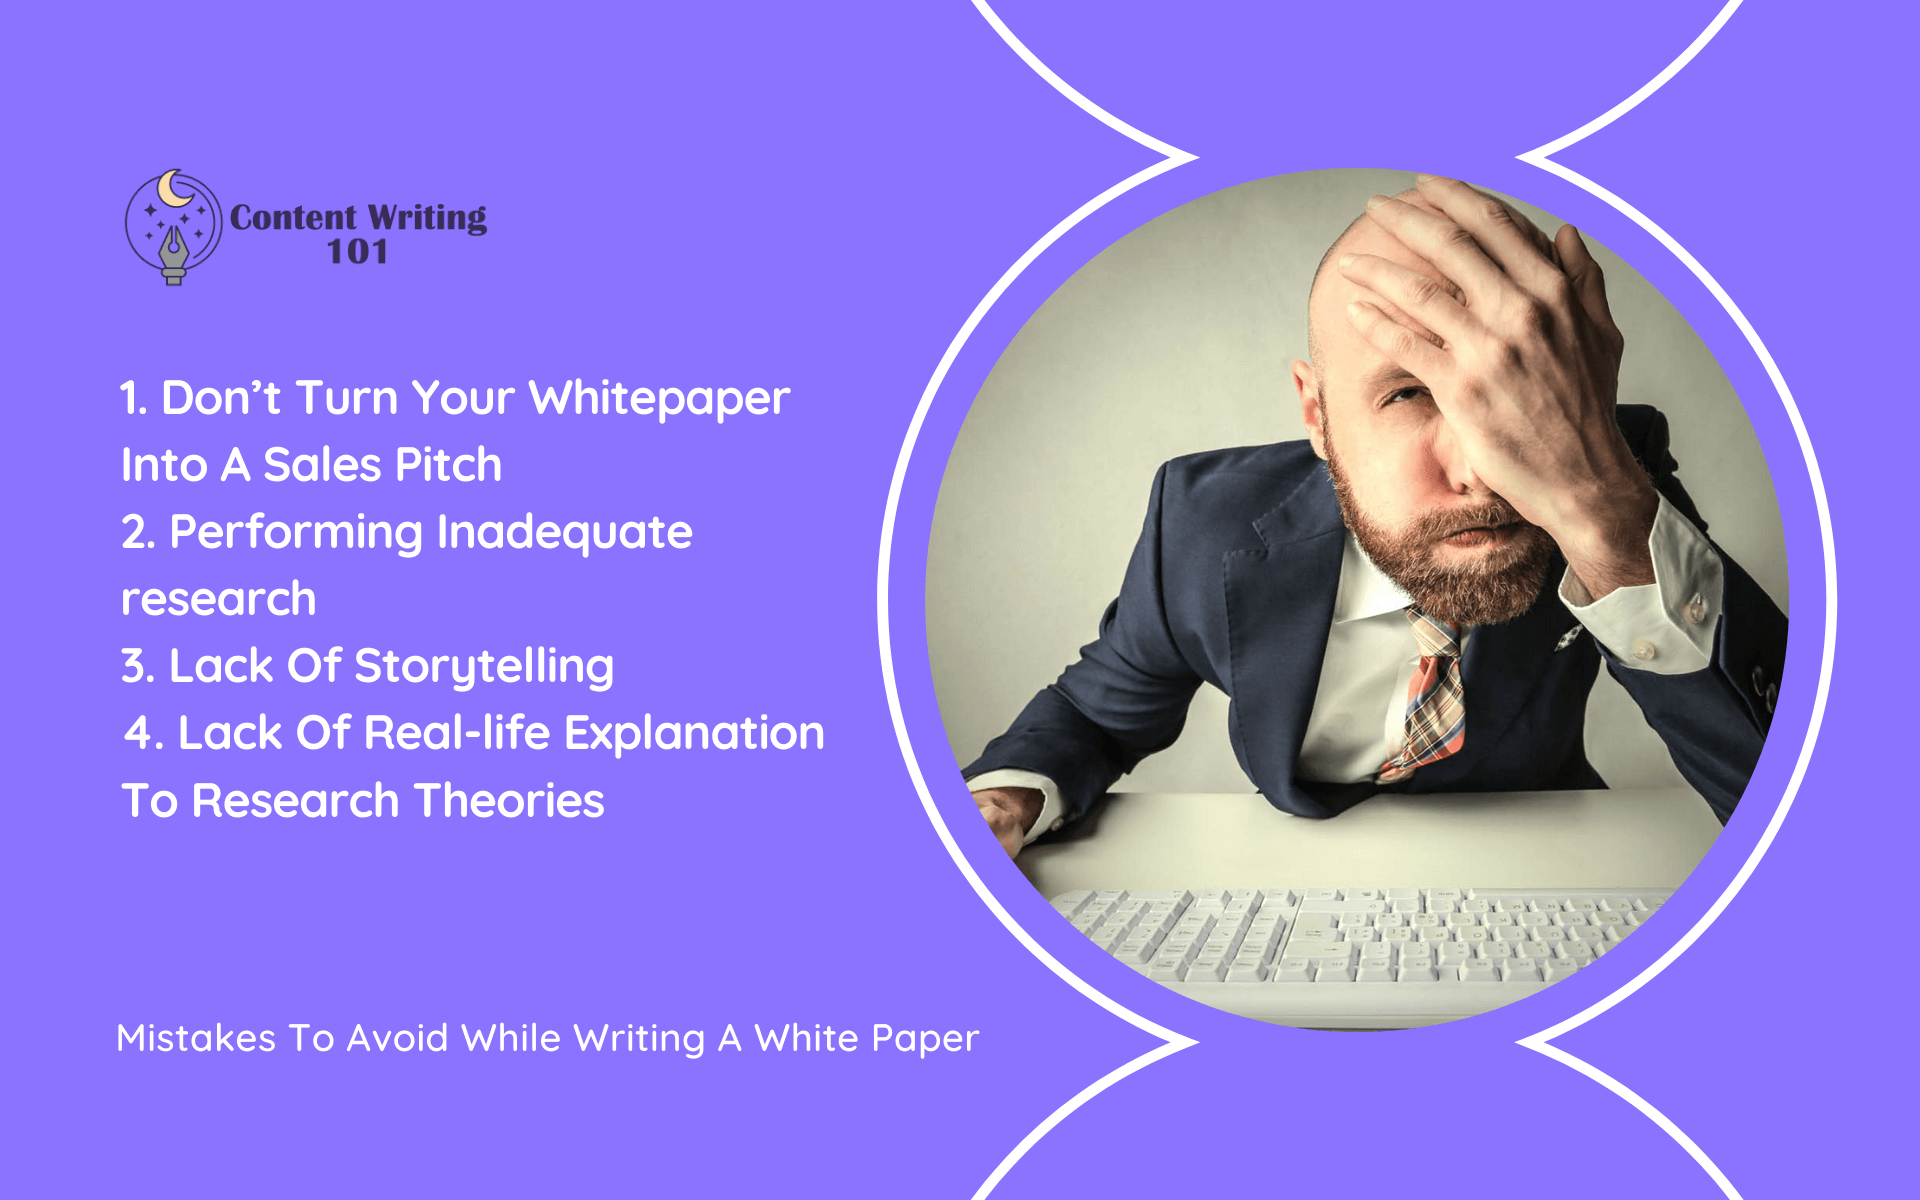 How To Write A White Paper?